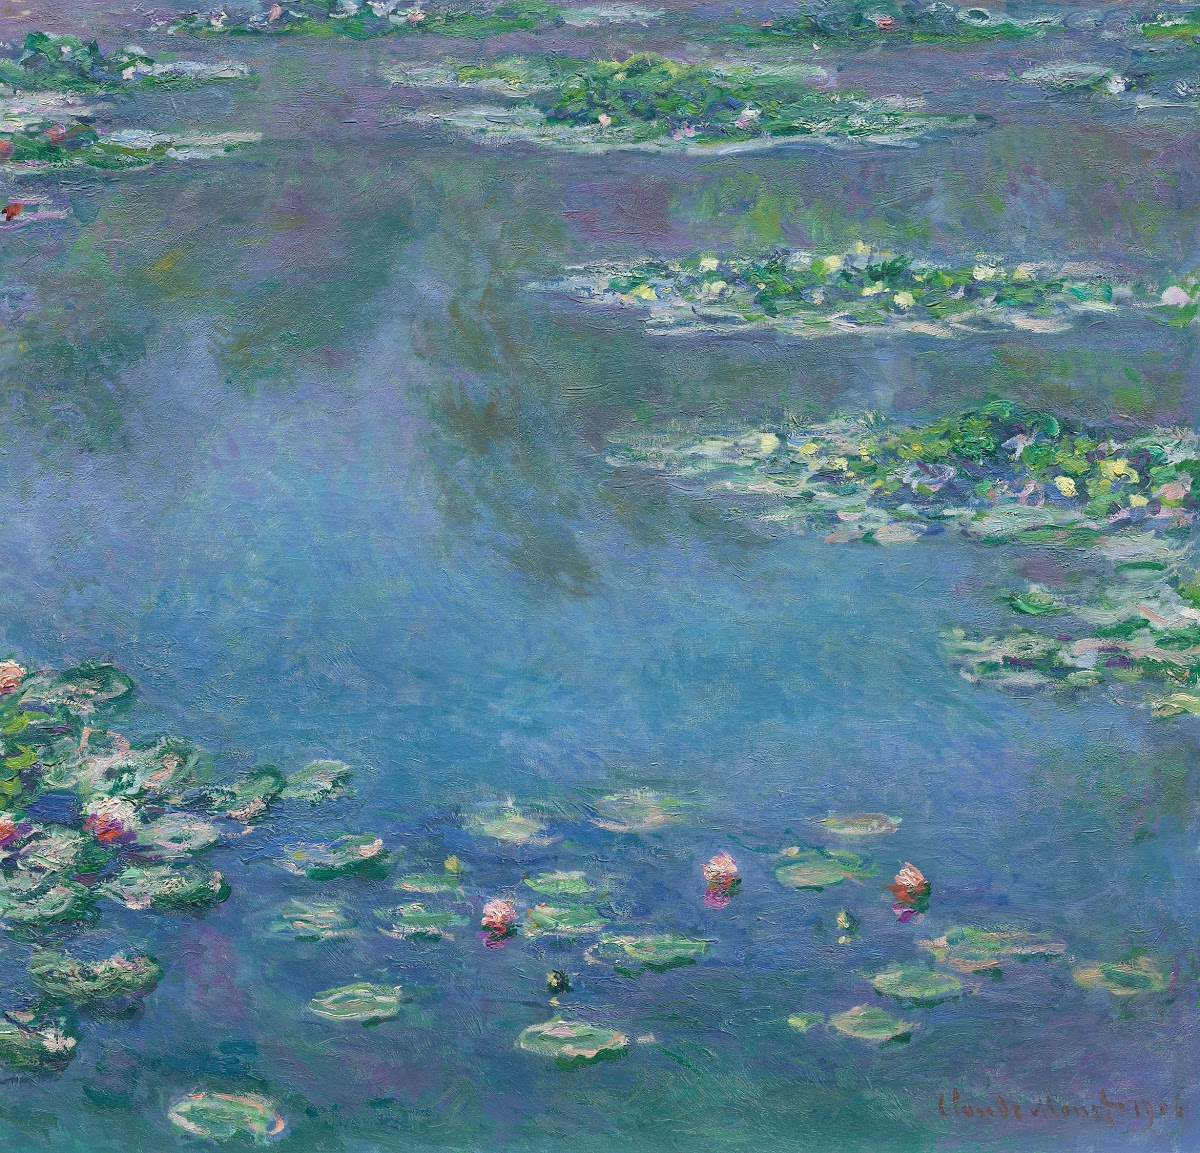 never knew about claude monet